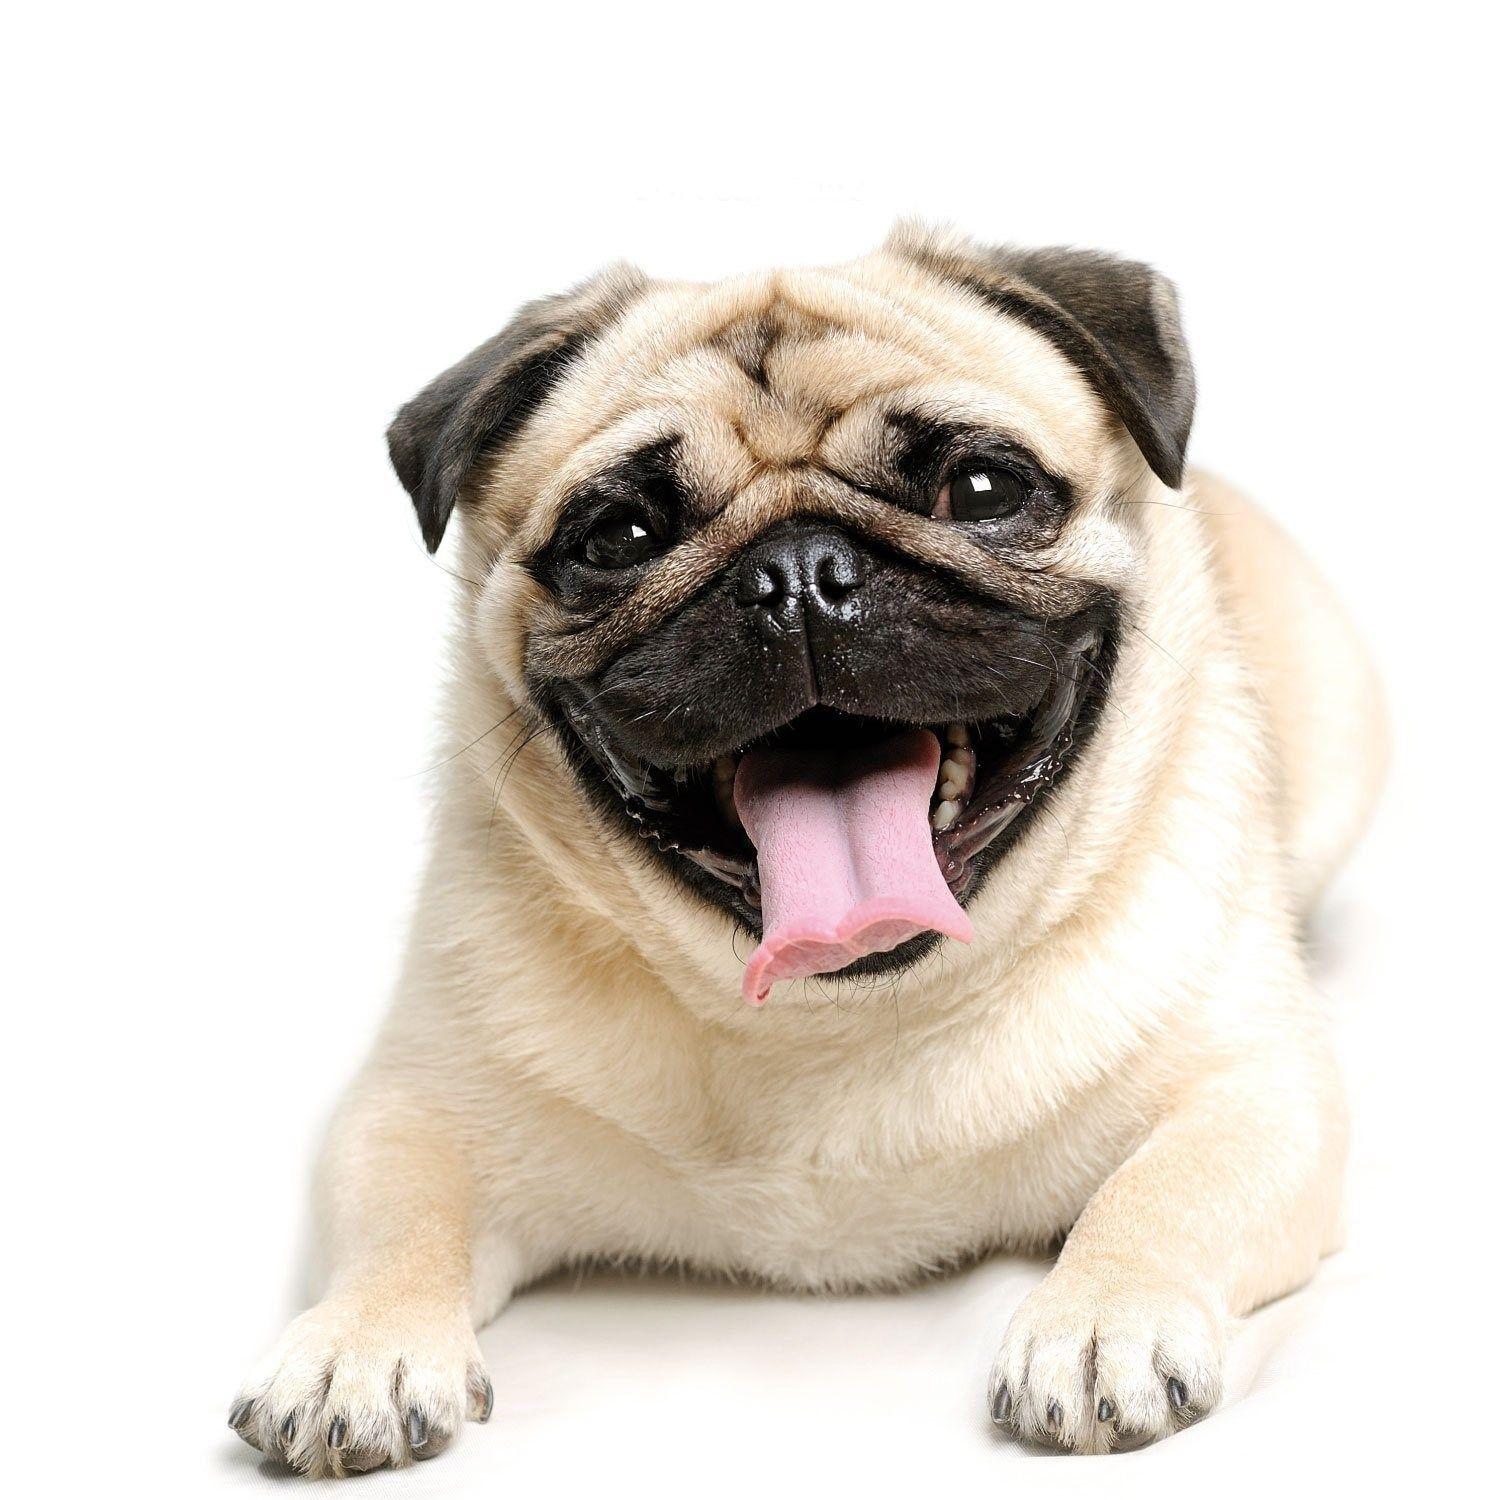 Pug Wallpaper, Screensaver, Background. List of small dogs, Smart dog, Pugs in costume